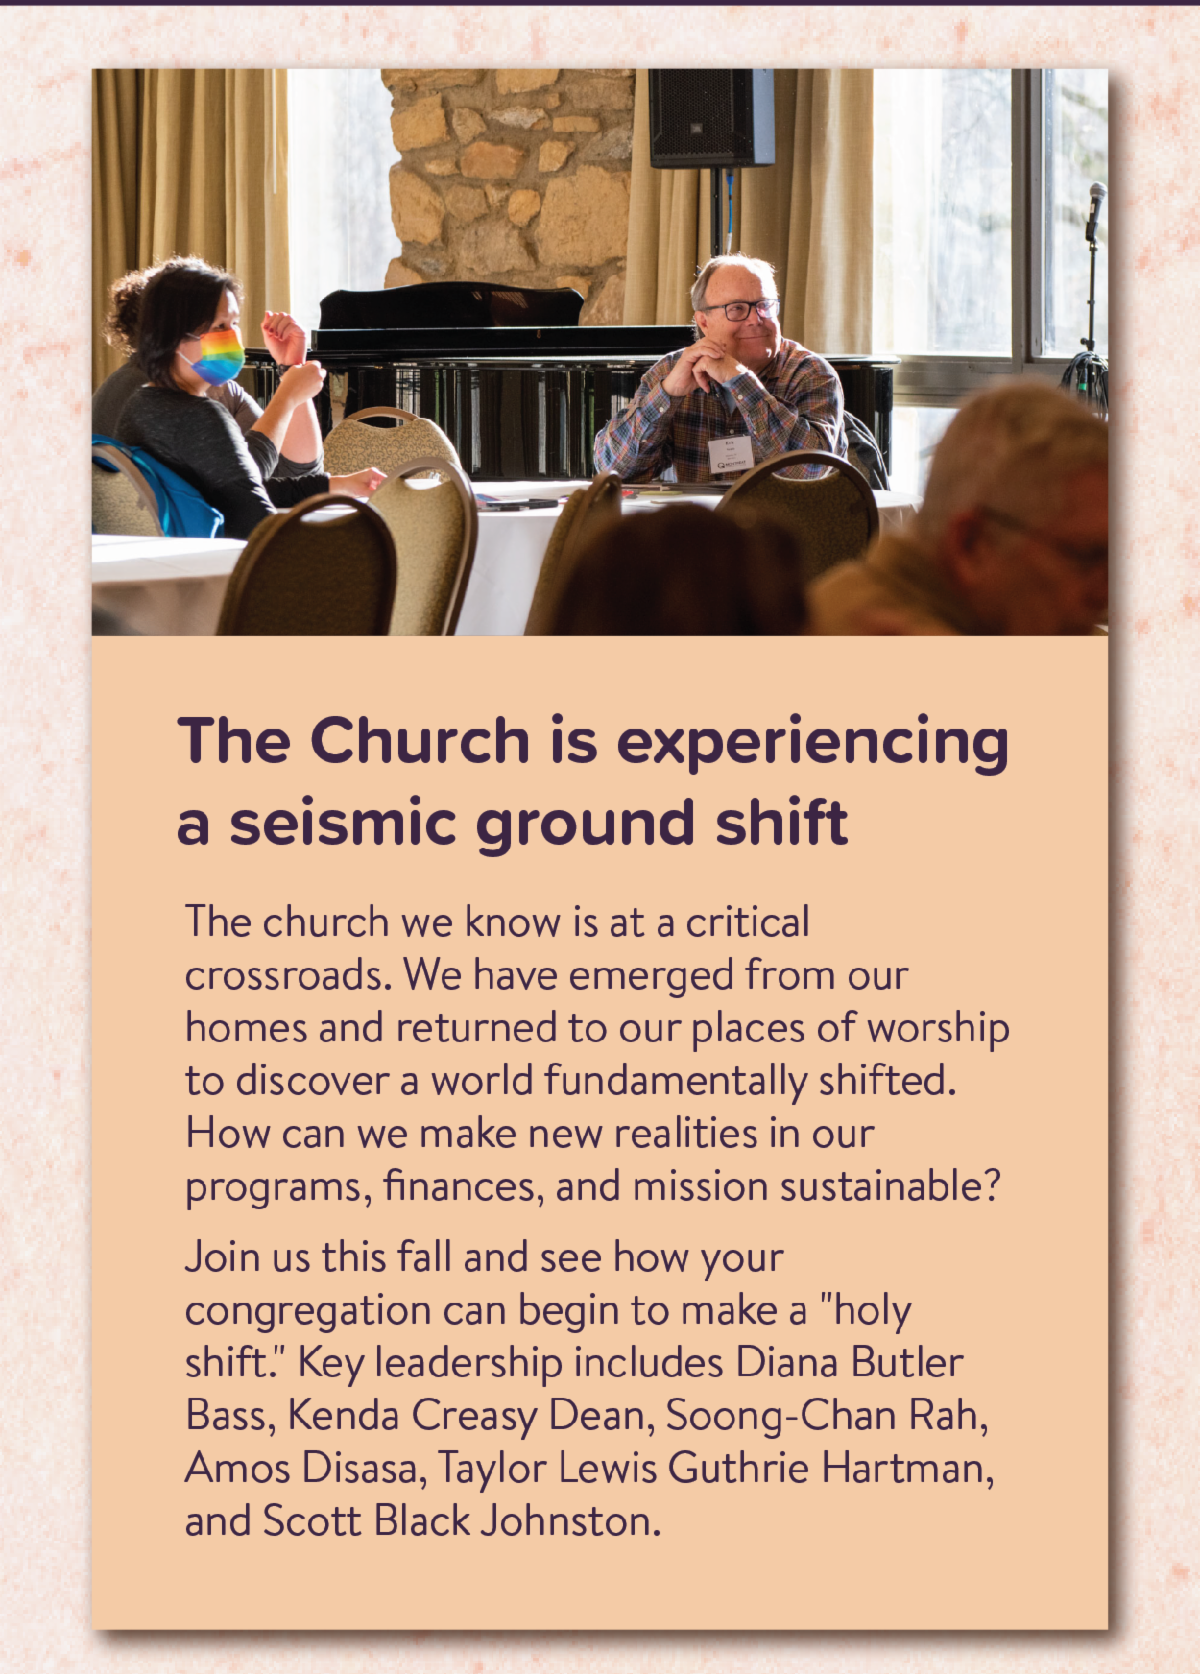 The Church is experiencing a seismic ground shift - The church we know is at a critical crossroads. We have emerged from our homes and returned to our places of worship to discover a world fundamentally shifted. How can we make new realities in our programs, finances, and mission sustainable? Join us this fall and see how your congregation can begin to make a "holy shift." Key leadership includes Diana Butler Bass, Kenda Creasy Dean, Soong-Chan Rah, Amos Disasa, Taylor Lewis Guthrie Hartman, and Scott Black Johnston.